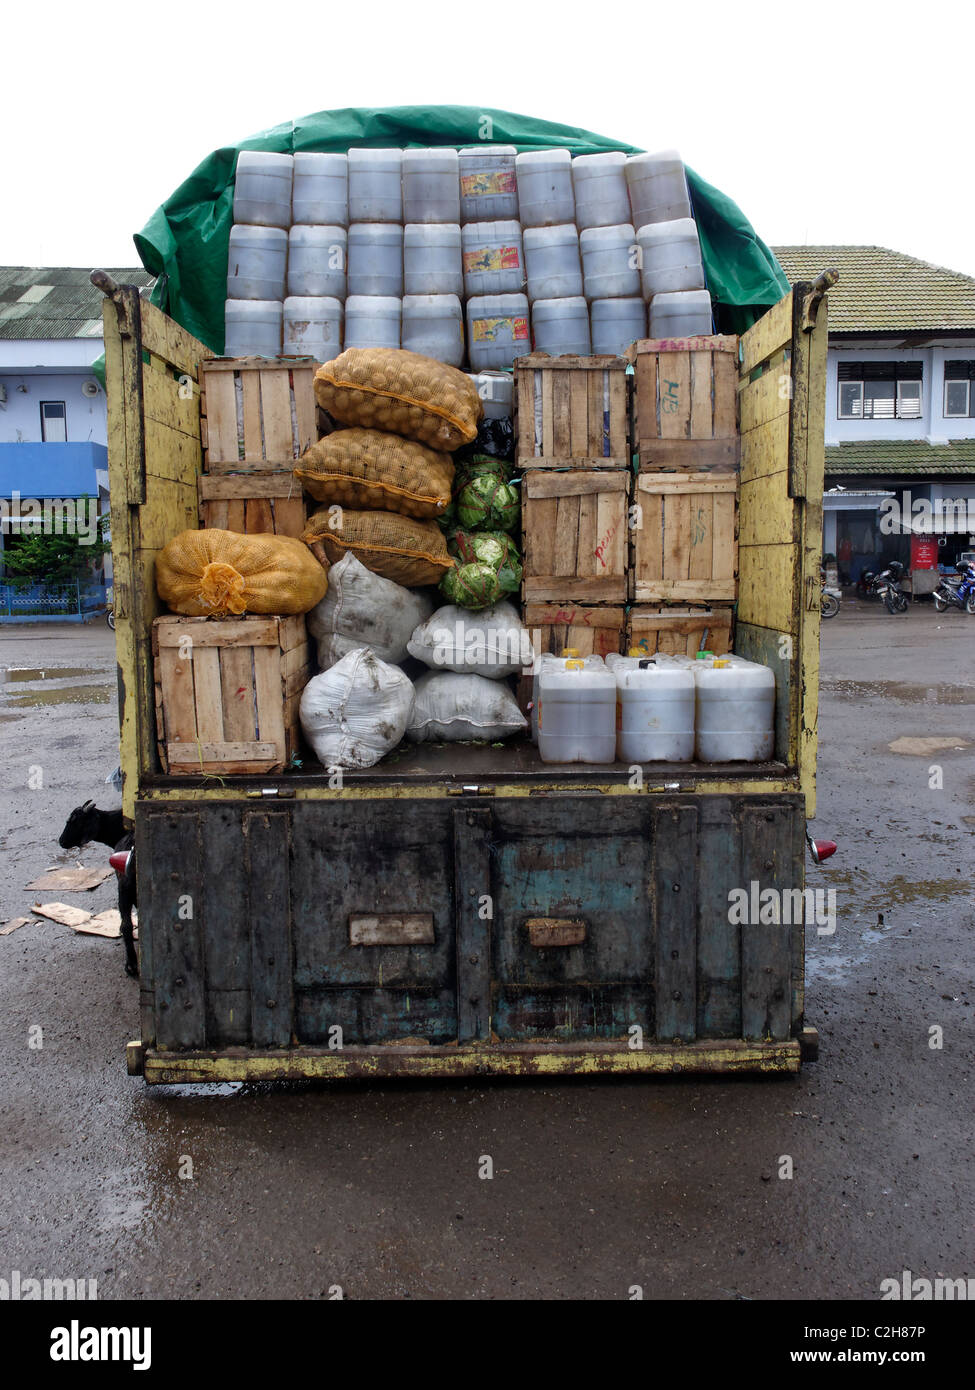 Lorry loaded with goods, Indonesia, March 2011 Stock Photo